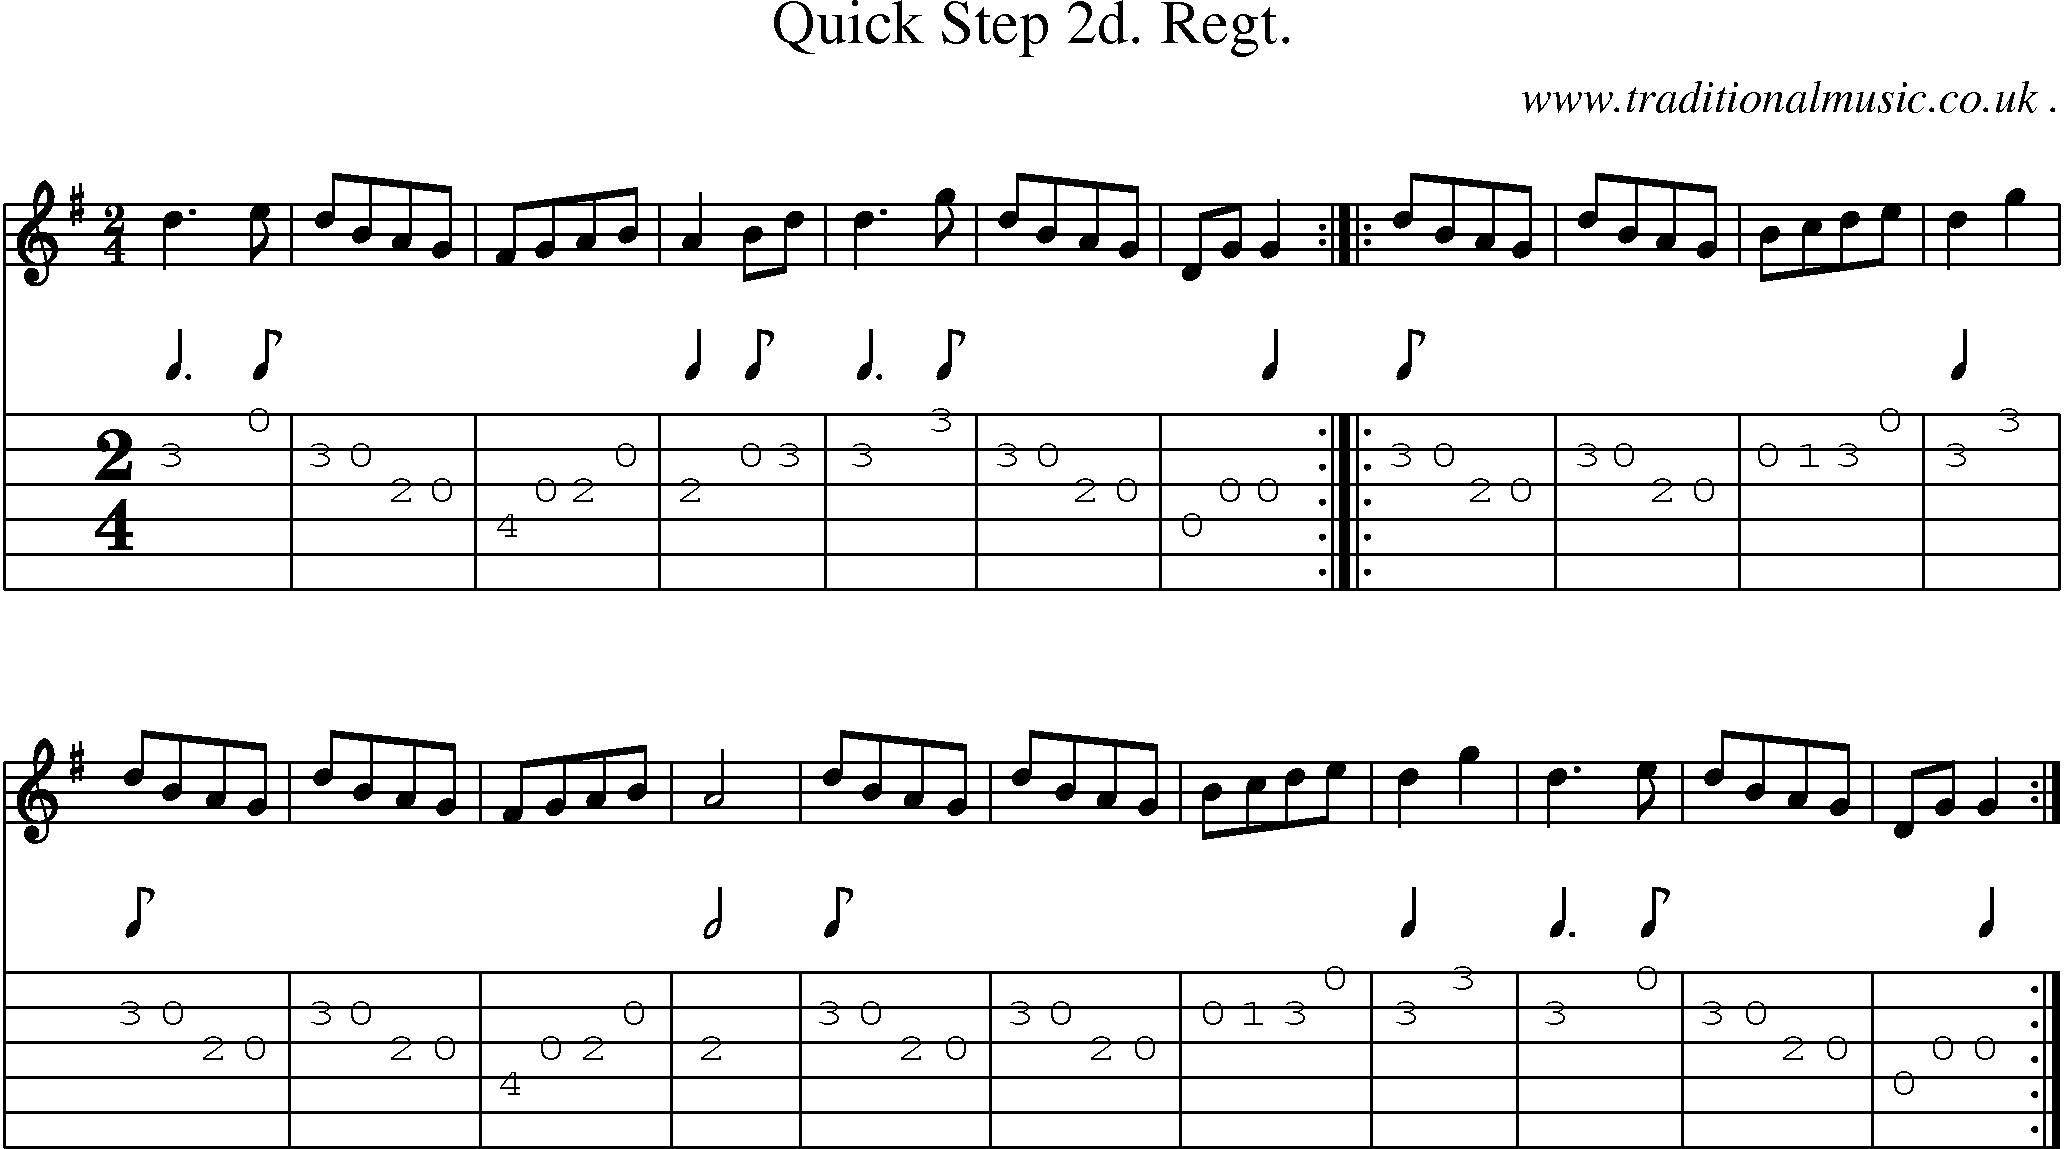 Sheet-Music and Guitar Tabs for Quick Step 2d Regt